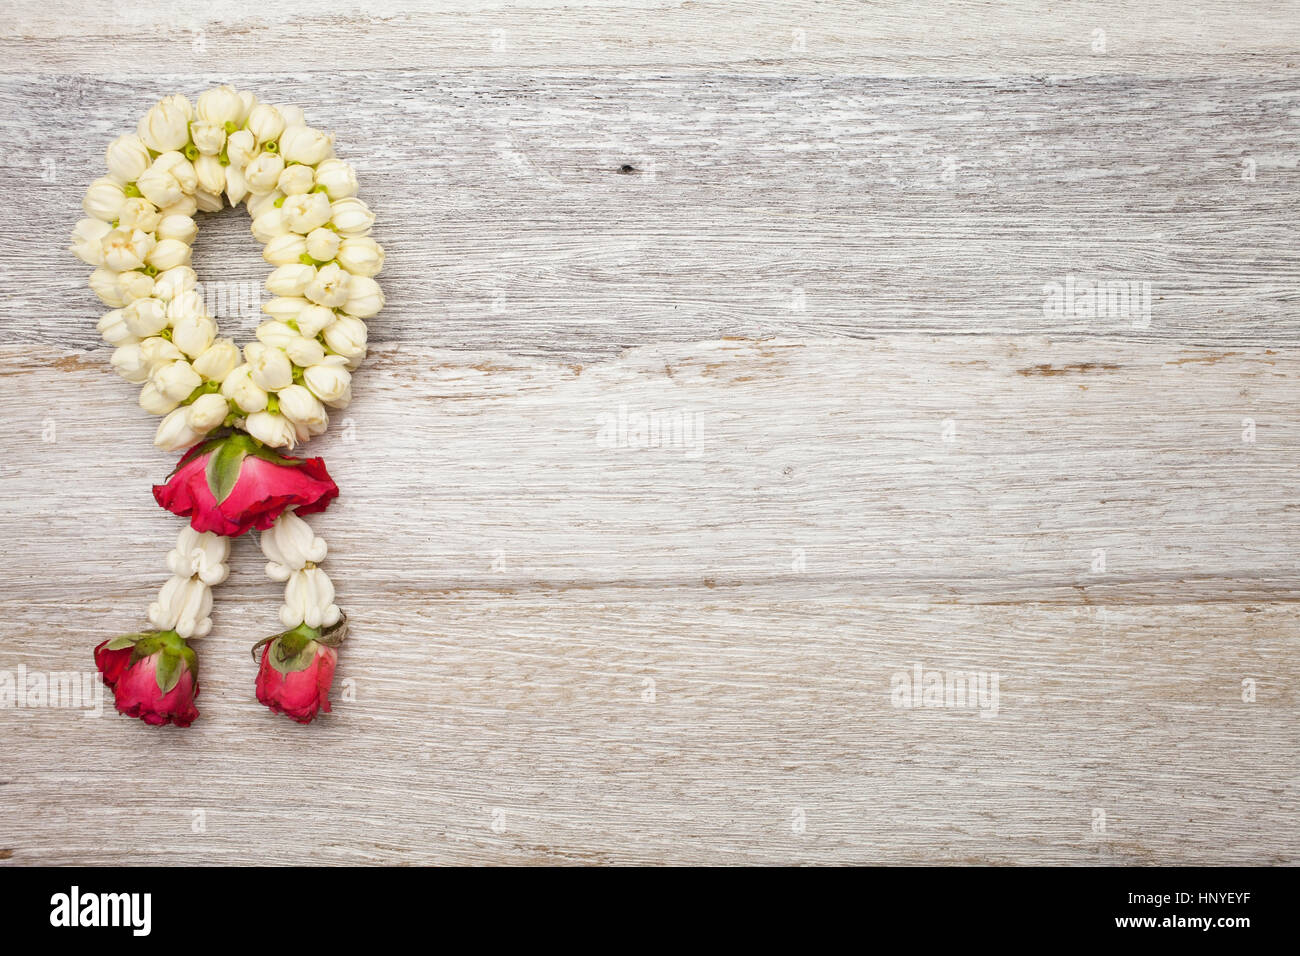 Garland on white wooden background Stock Photo